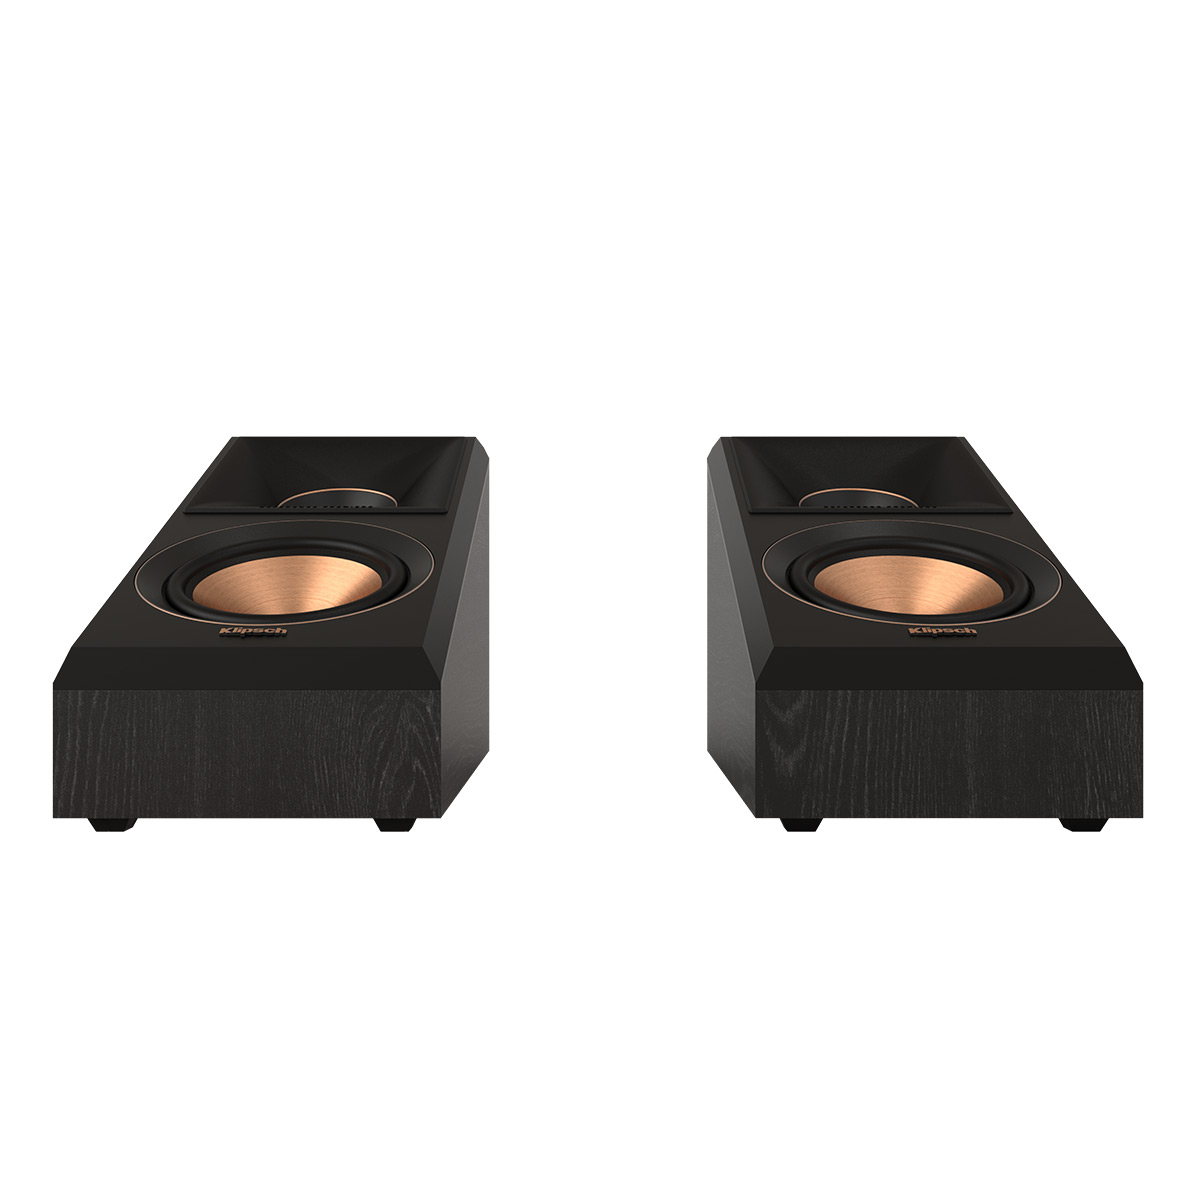 Klipsch RP-500SA II Reference Premiere Dolby Atmos Speaker - Pair (Ebony) - image 3 of 10